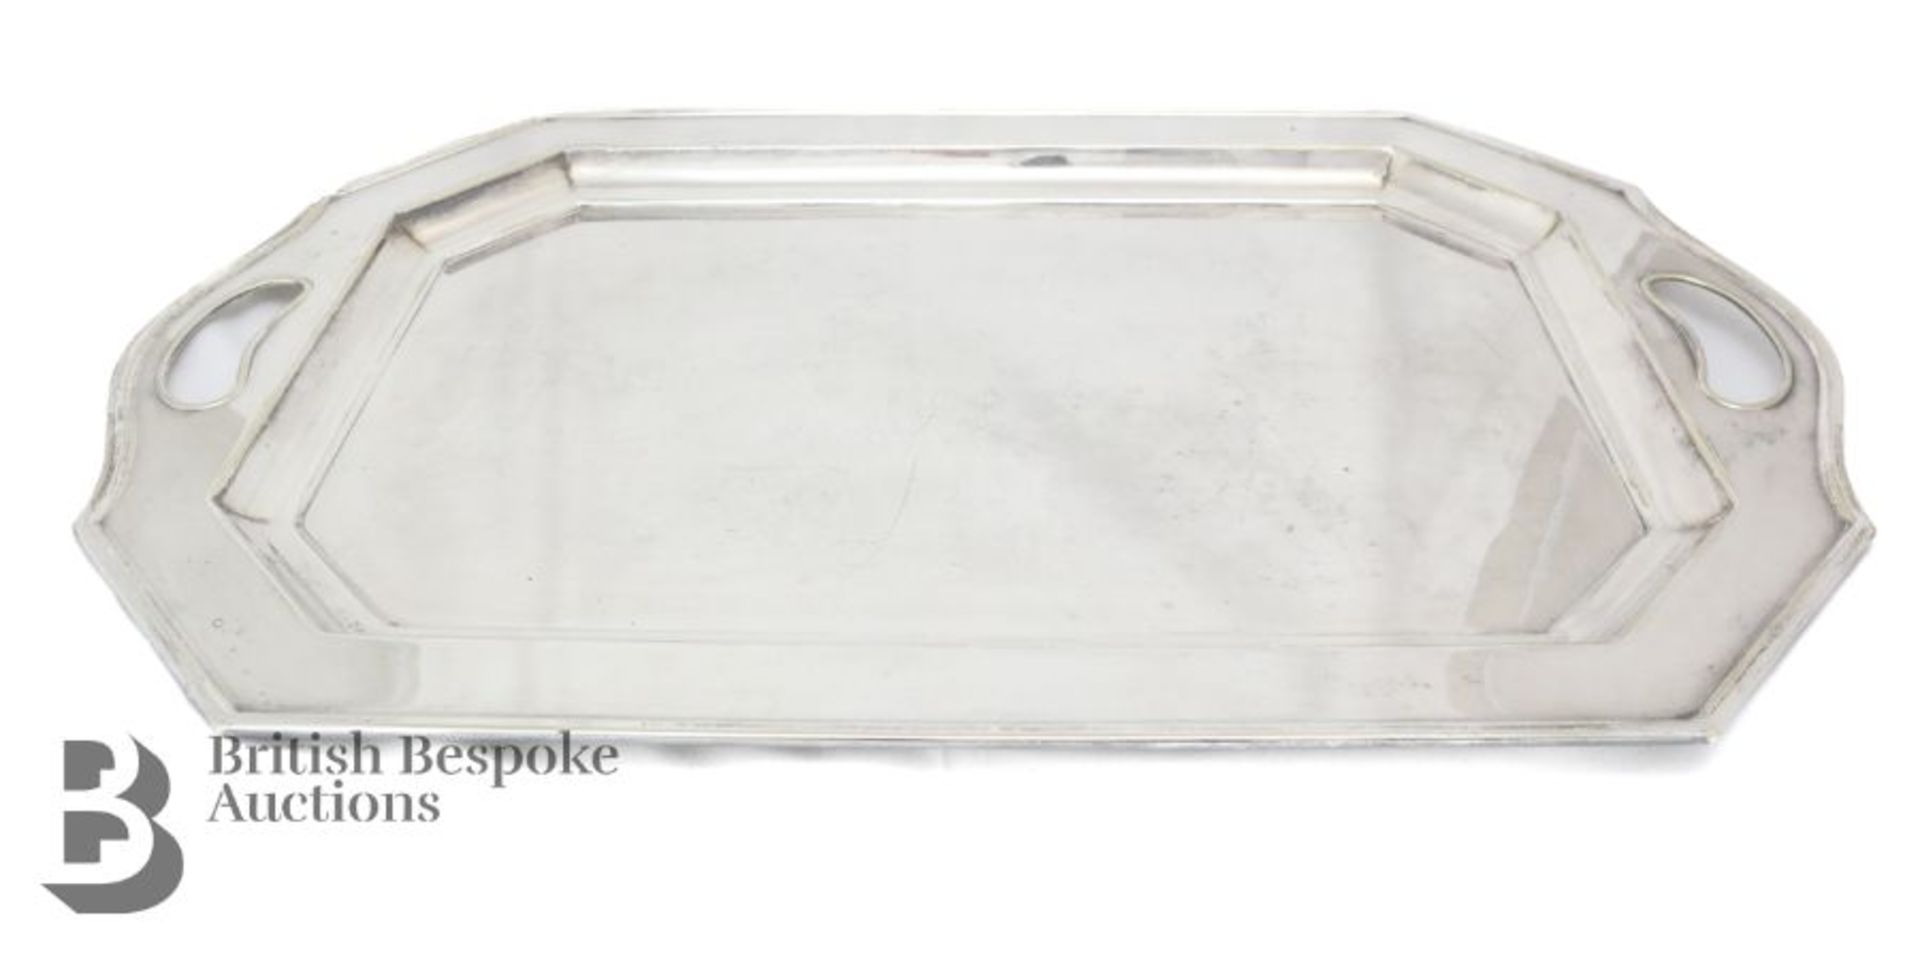 Edwardian Silver Plated Serving Tray